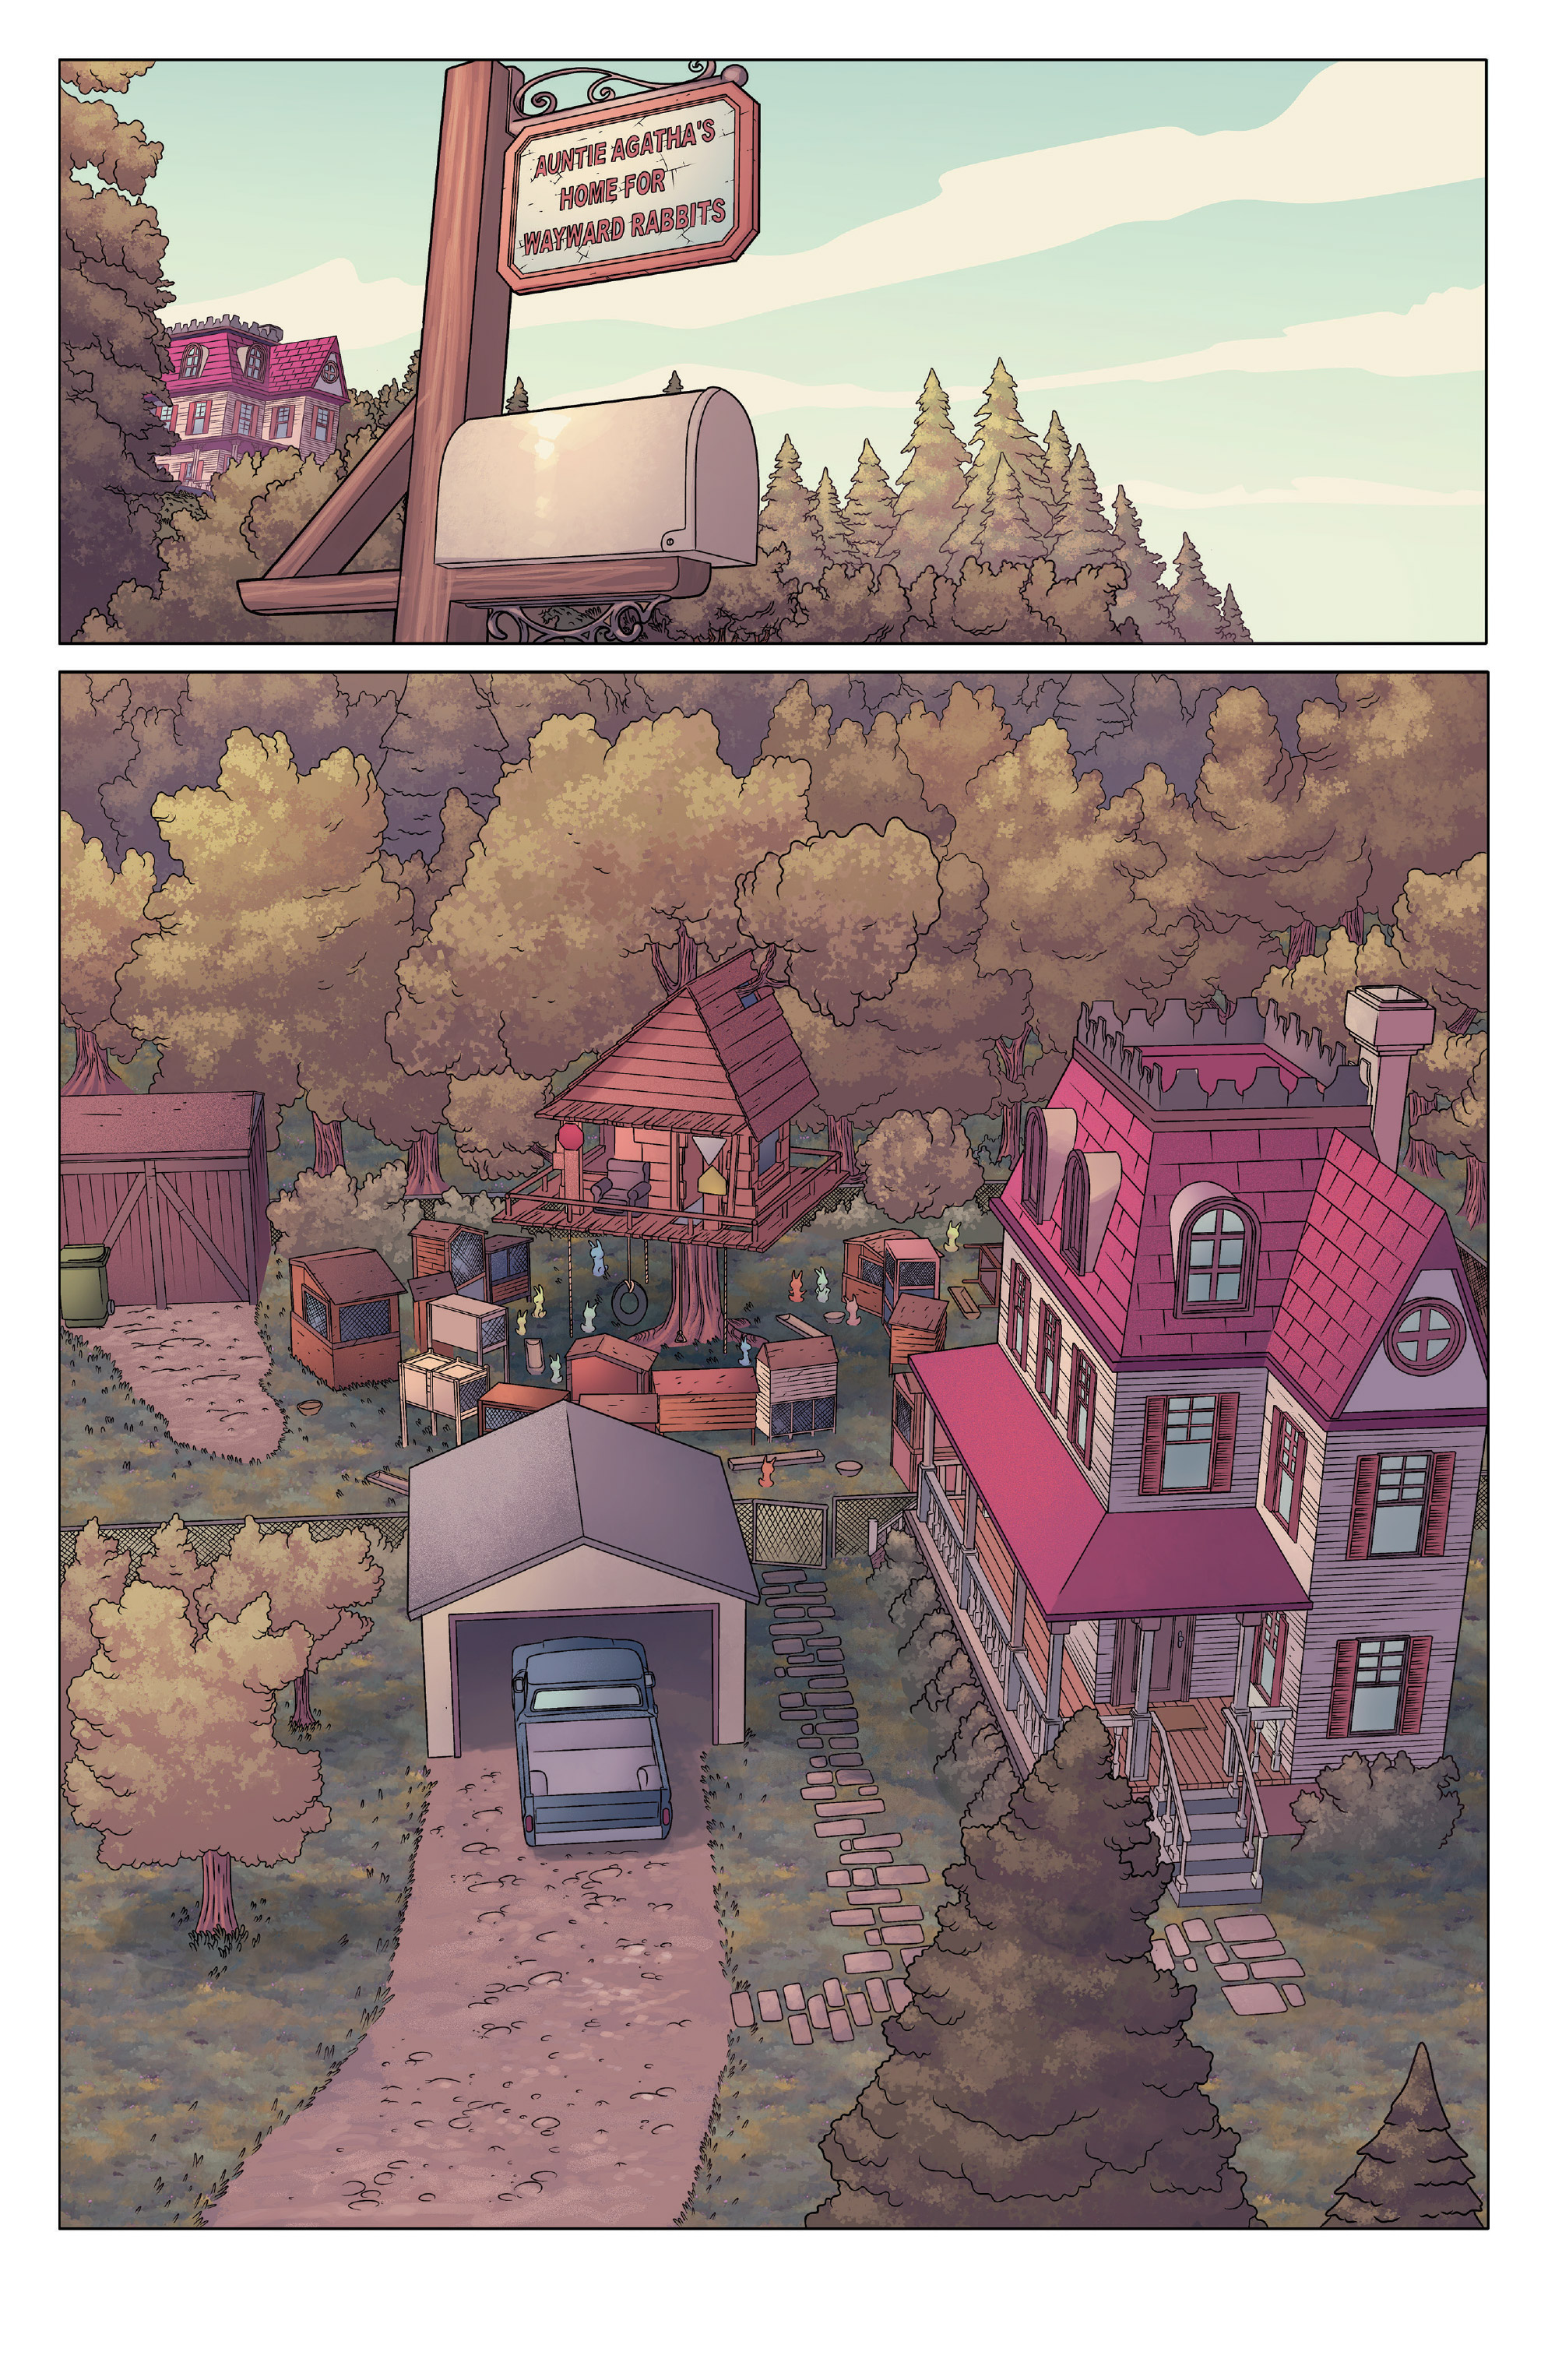 Auntie Agatha's Home For Wayward Rabbits (2018-): Chapter 1 - Page 4